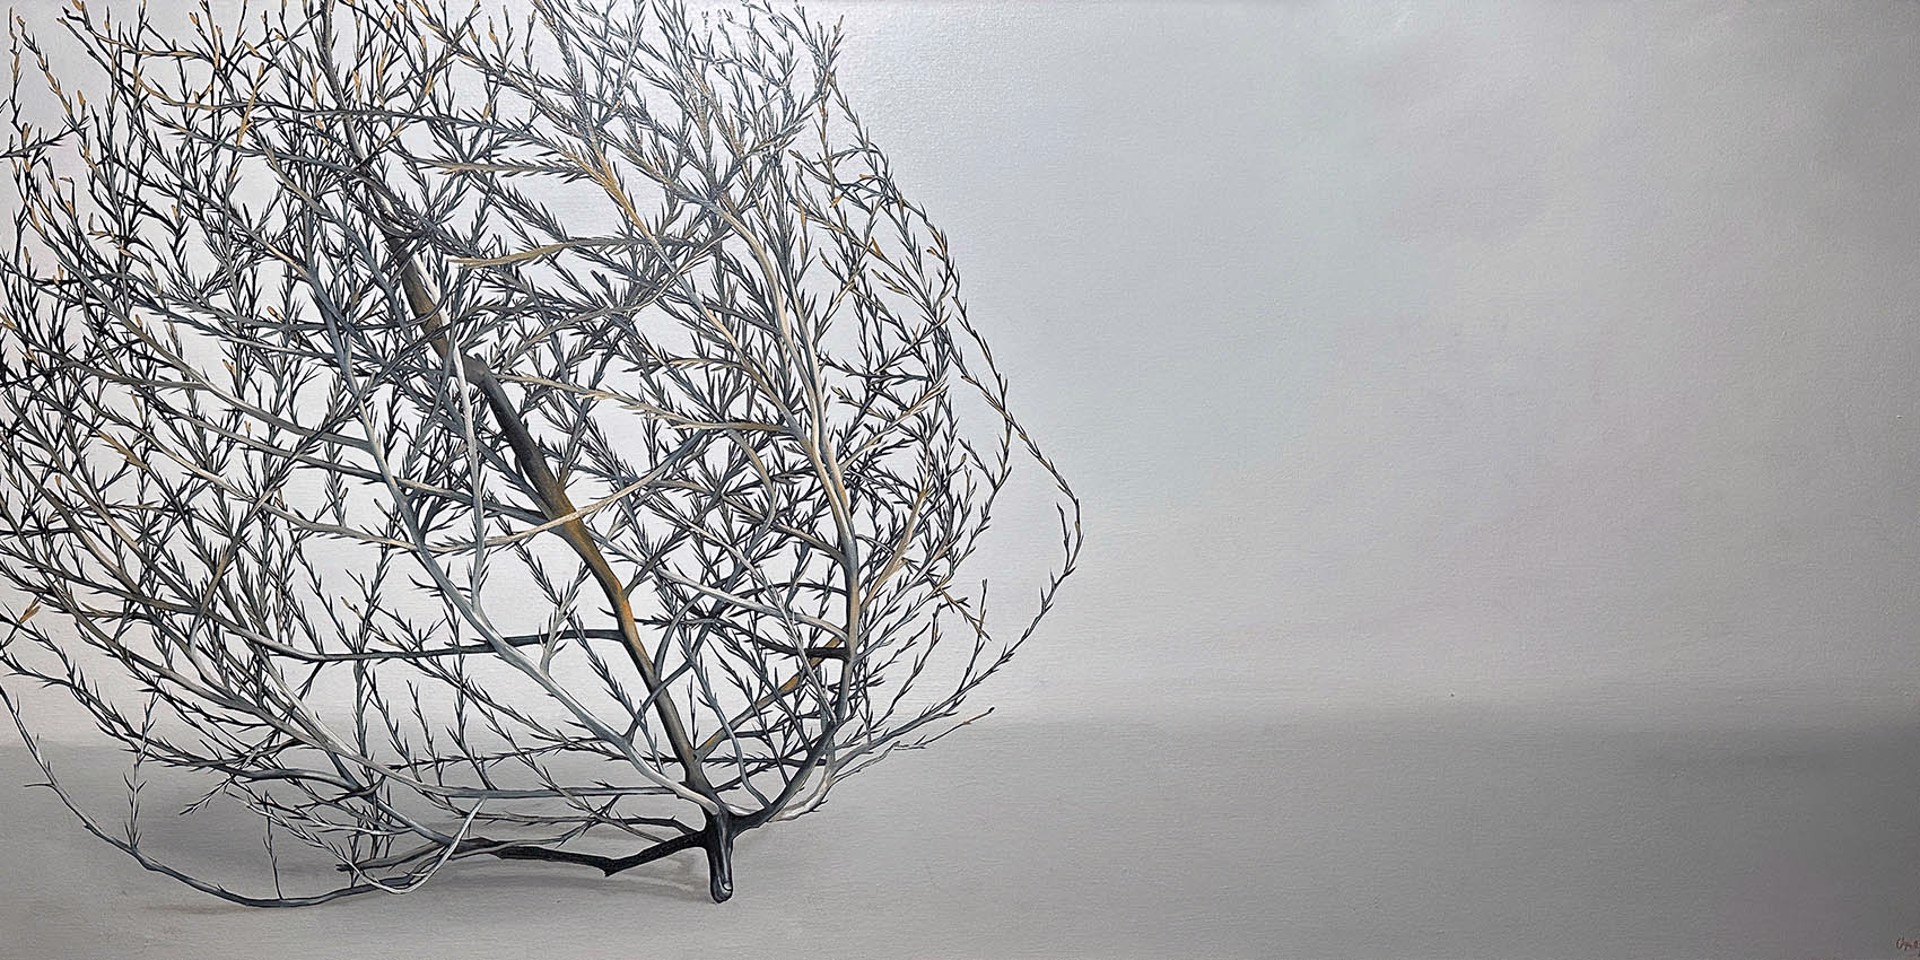 Original Oil Painting By Christy Stallop Featuring A Tumbleweed On Gray Background